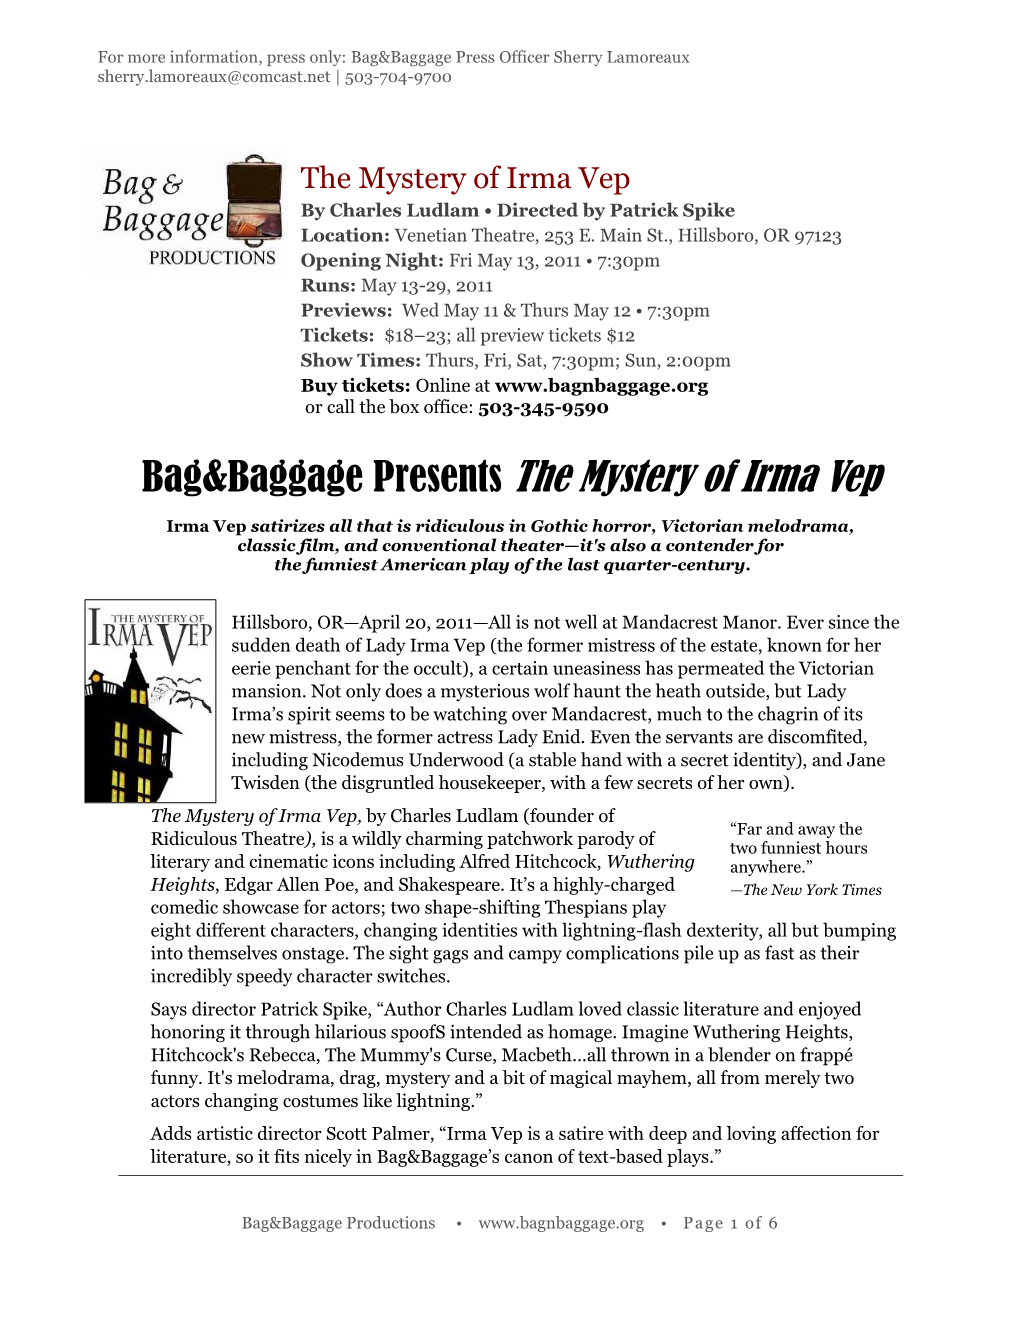 Bag&Baggage Presents the Mystery of Irma